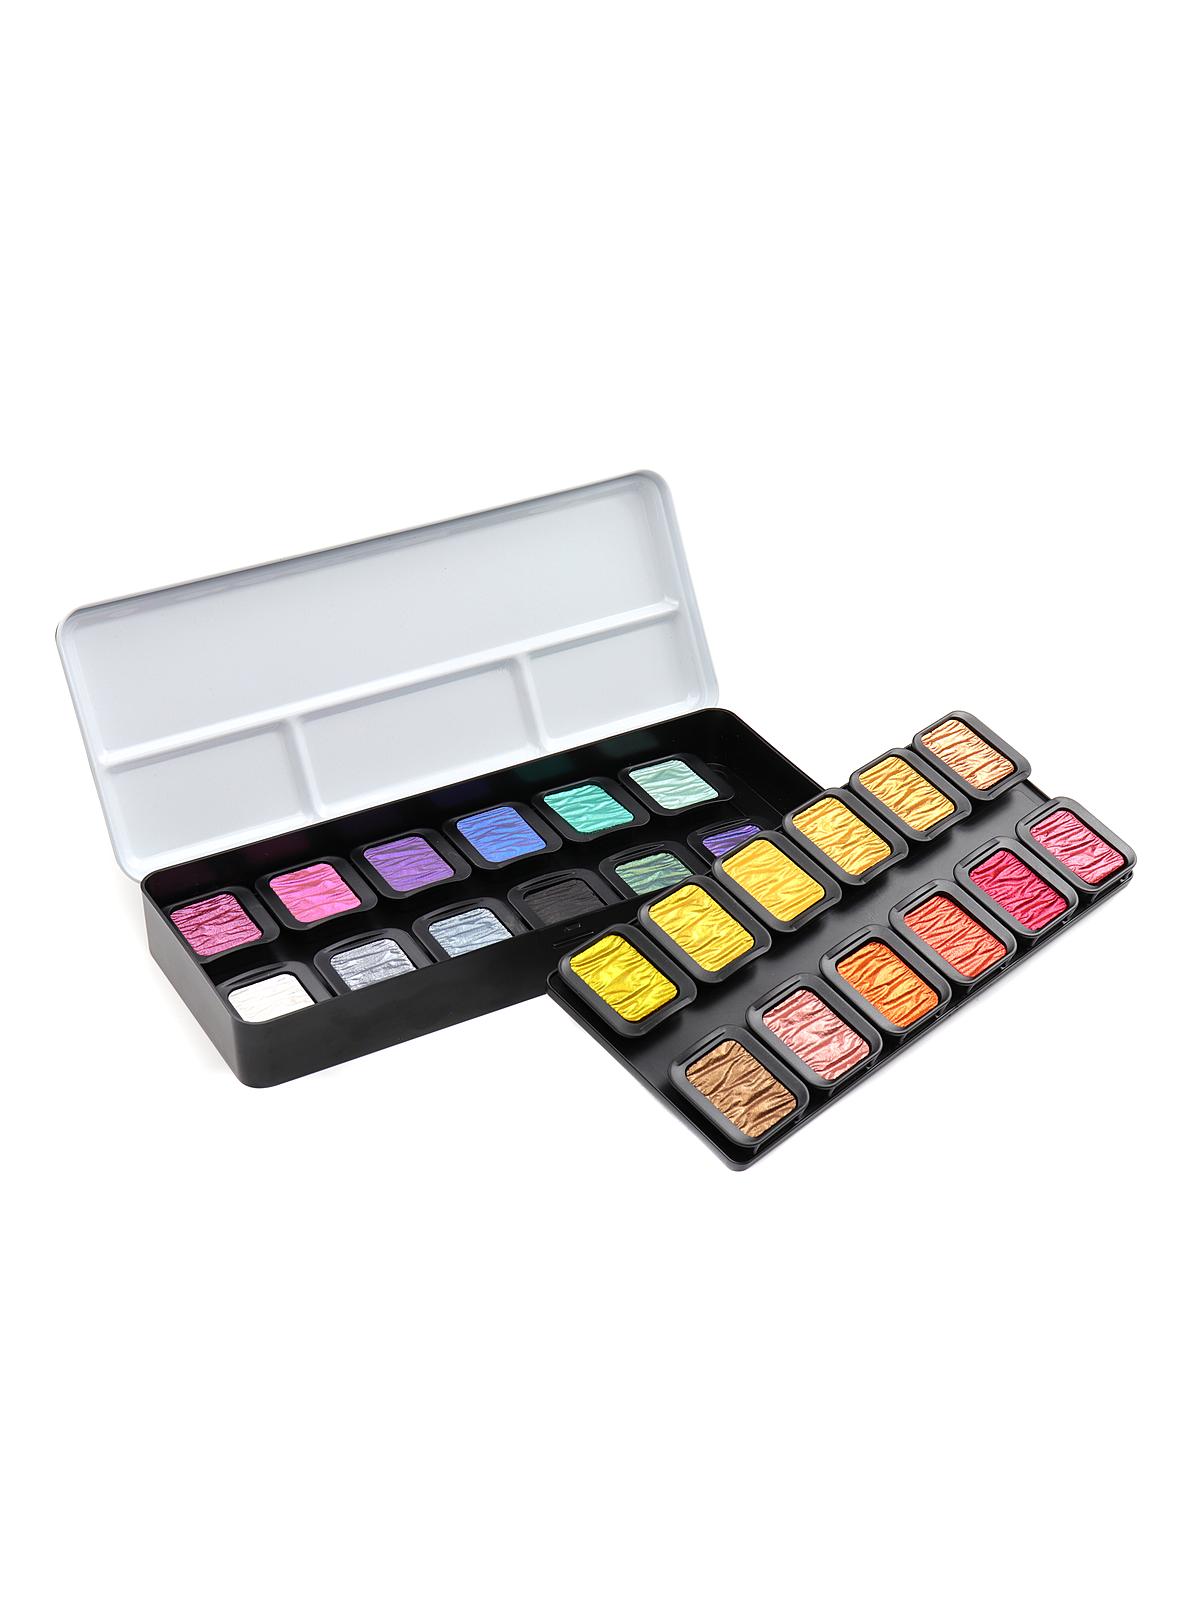 Pearlescent Colors In A Metal Box Colorful Pack Of 24